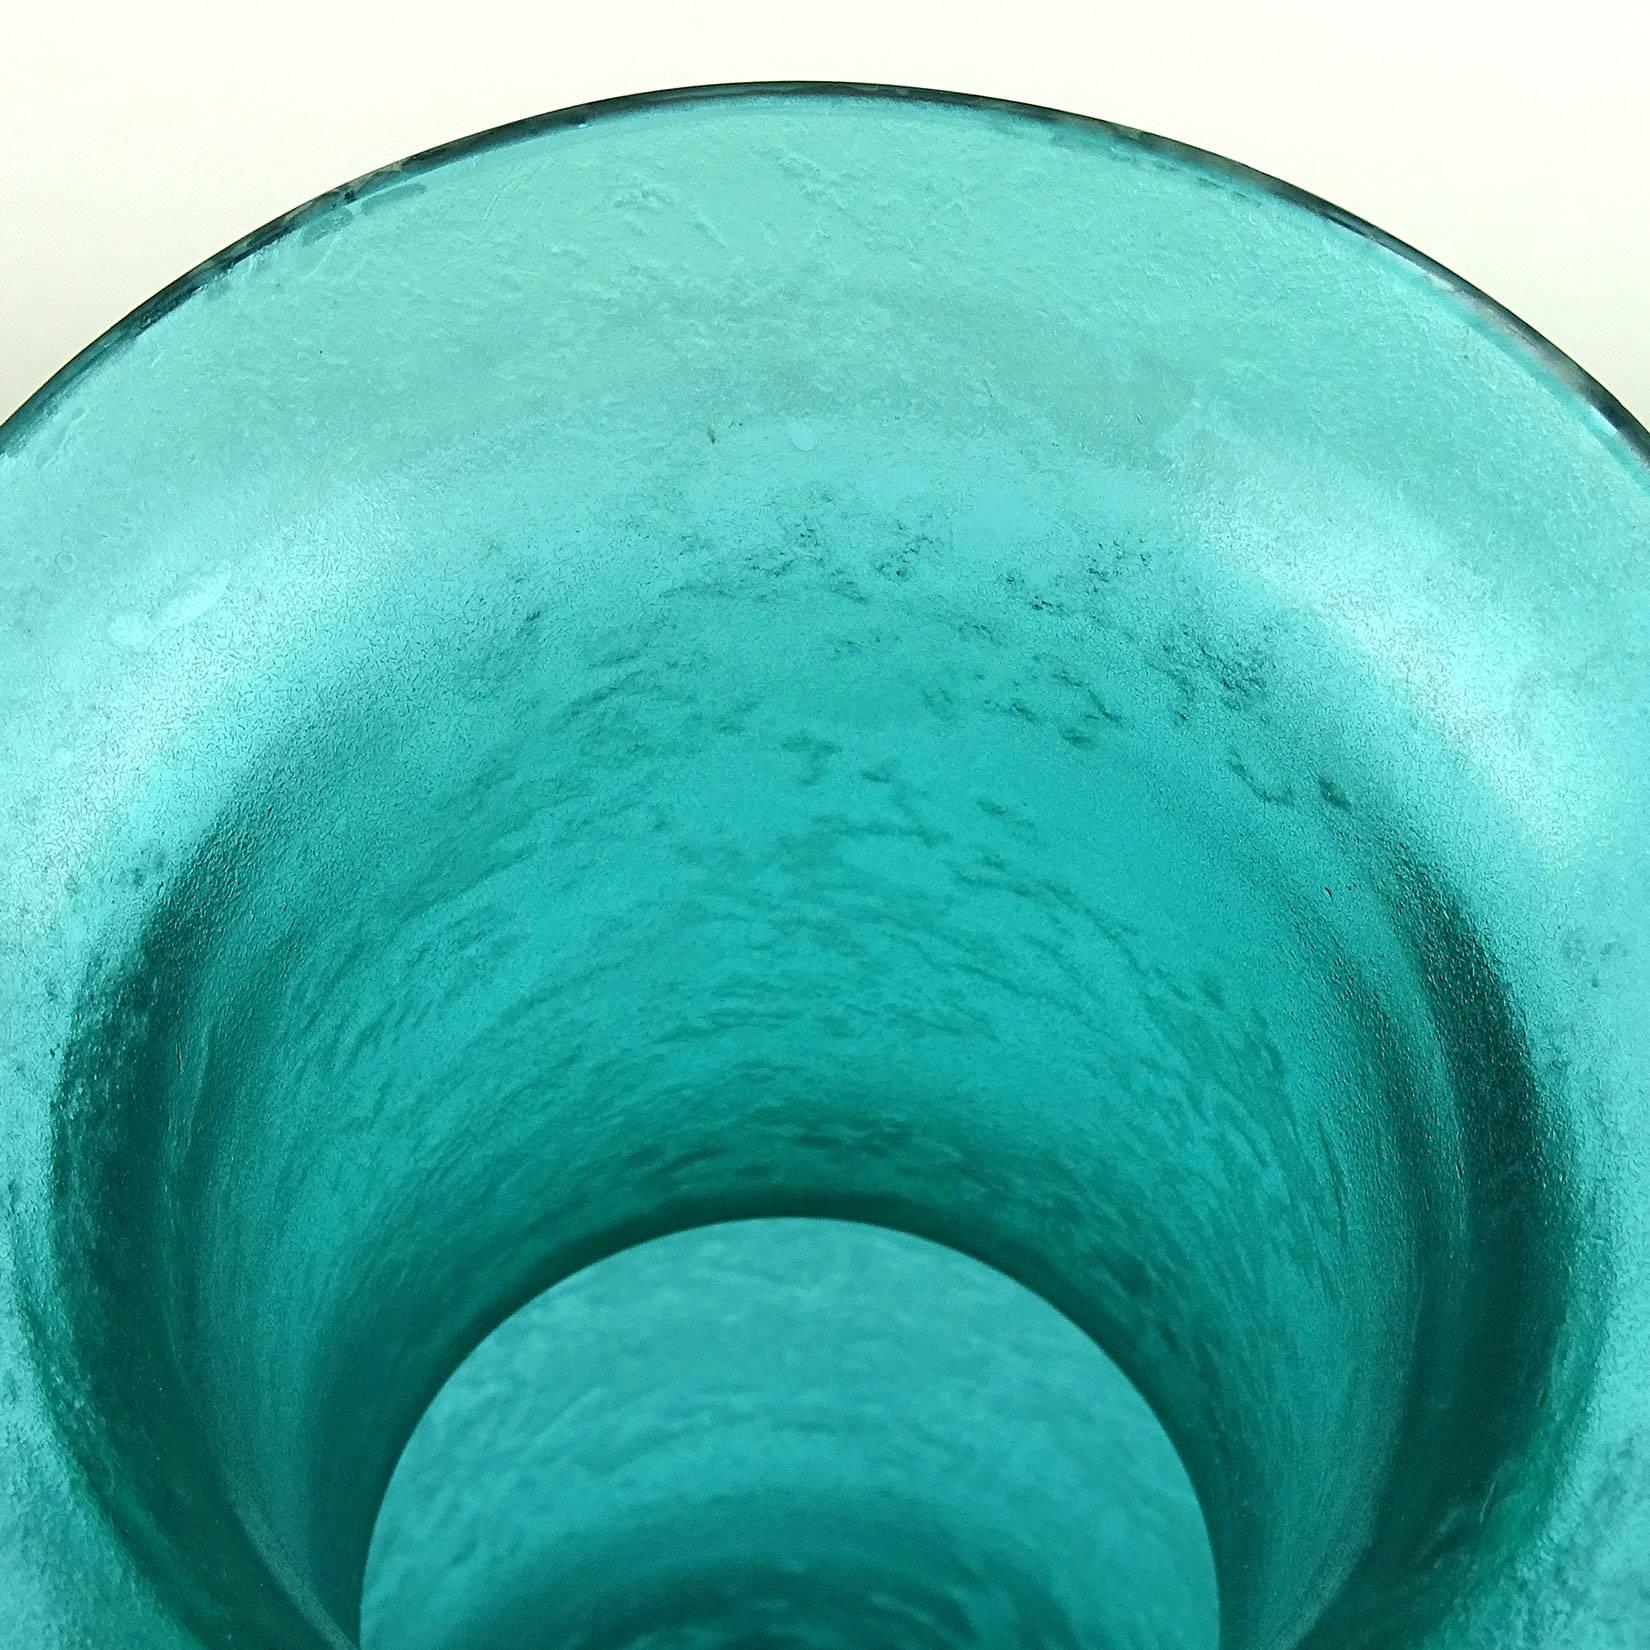 Hand-Crafted Murano Sommerso Aqua Green Corroso Texture Italian Art Glass Flower Vase For Sale